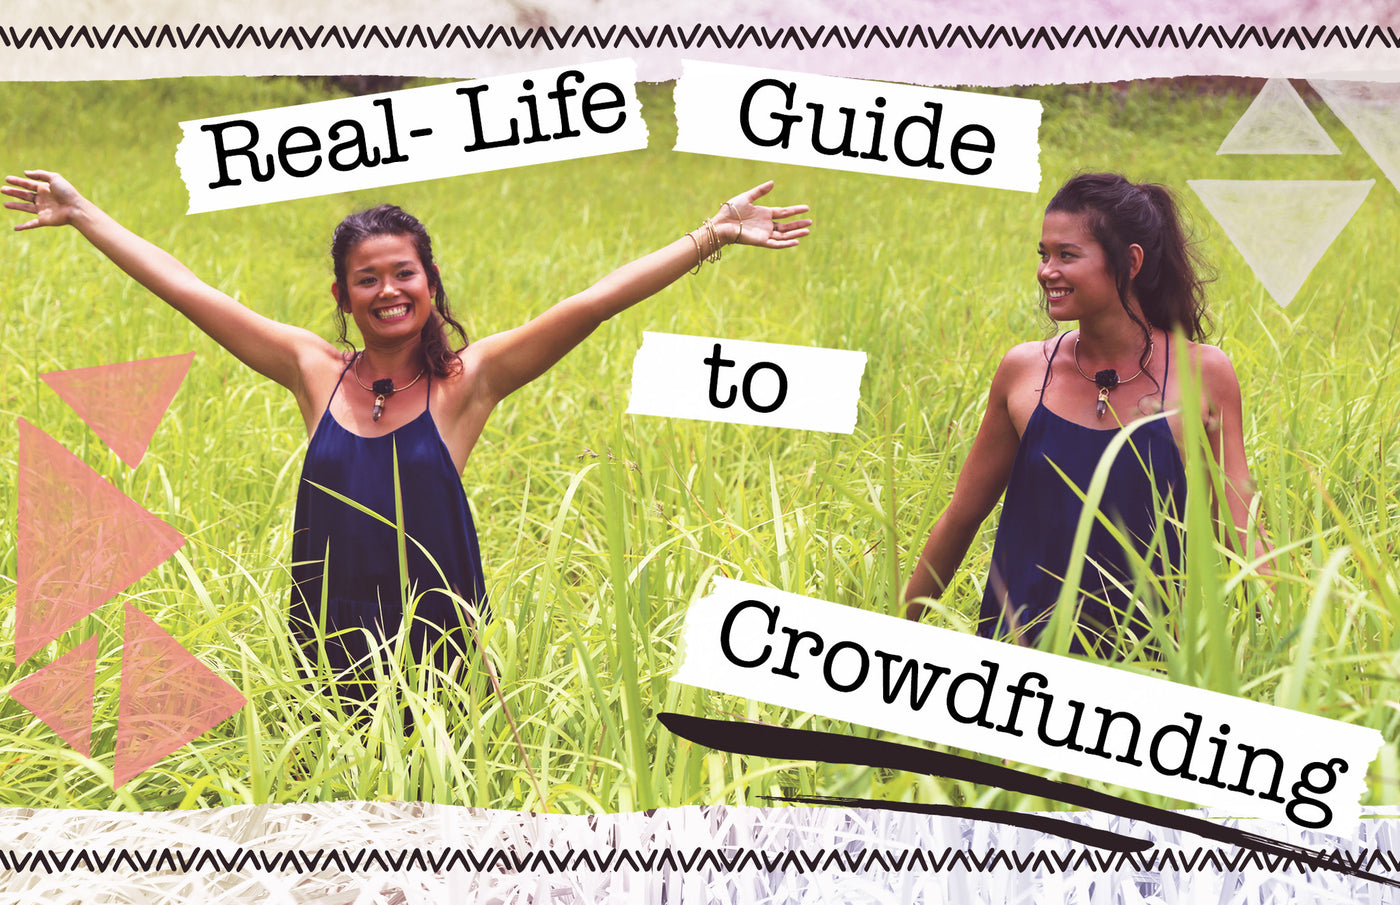 A Real-Life Guide to Crowdfunding: Part 3